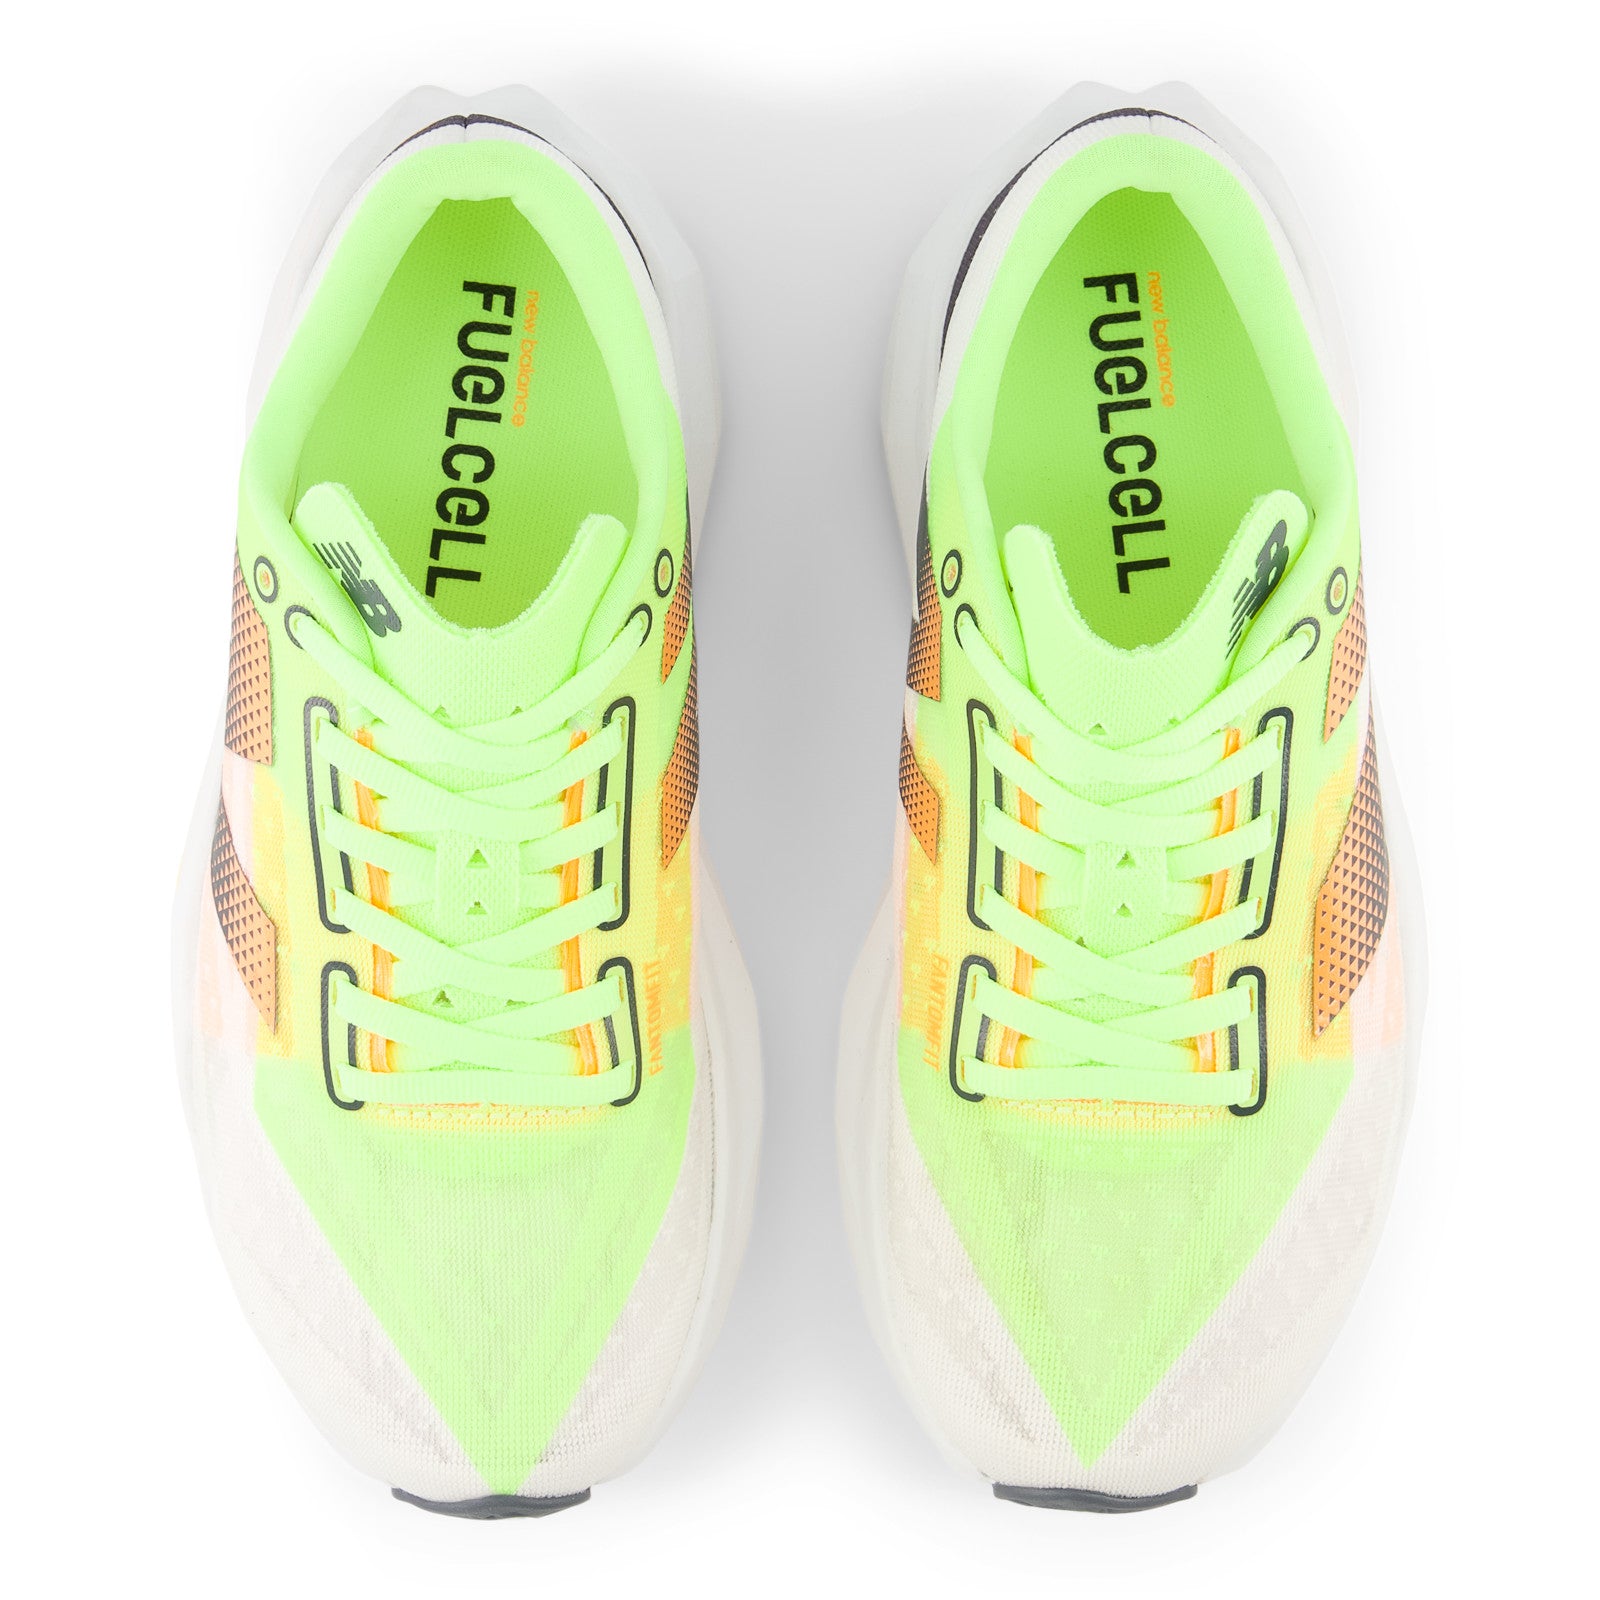 NEW BALANCE WOMEN'S FUELCELL REBEL V4 - B - LA4 WHITE/BLEACHED LIME GLO 